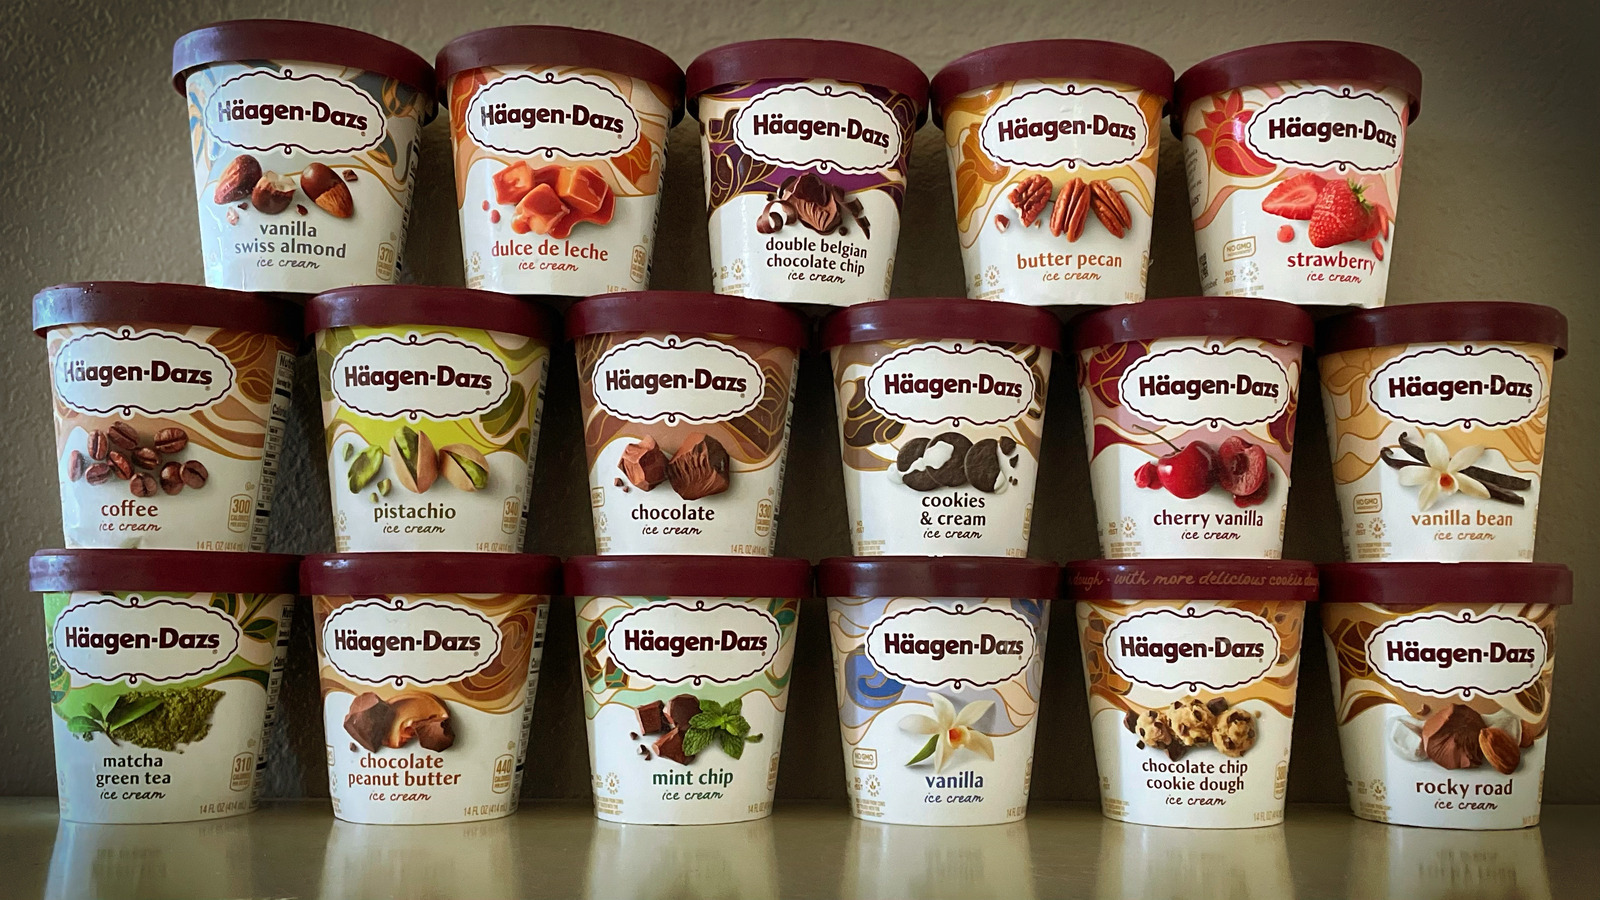 17 HäagenDazs Flavors, Ranked From Worst To Best